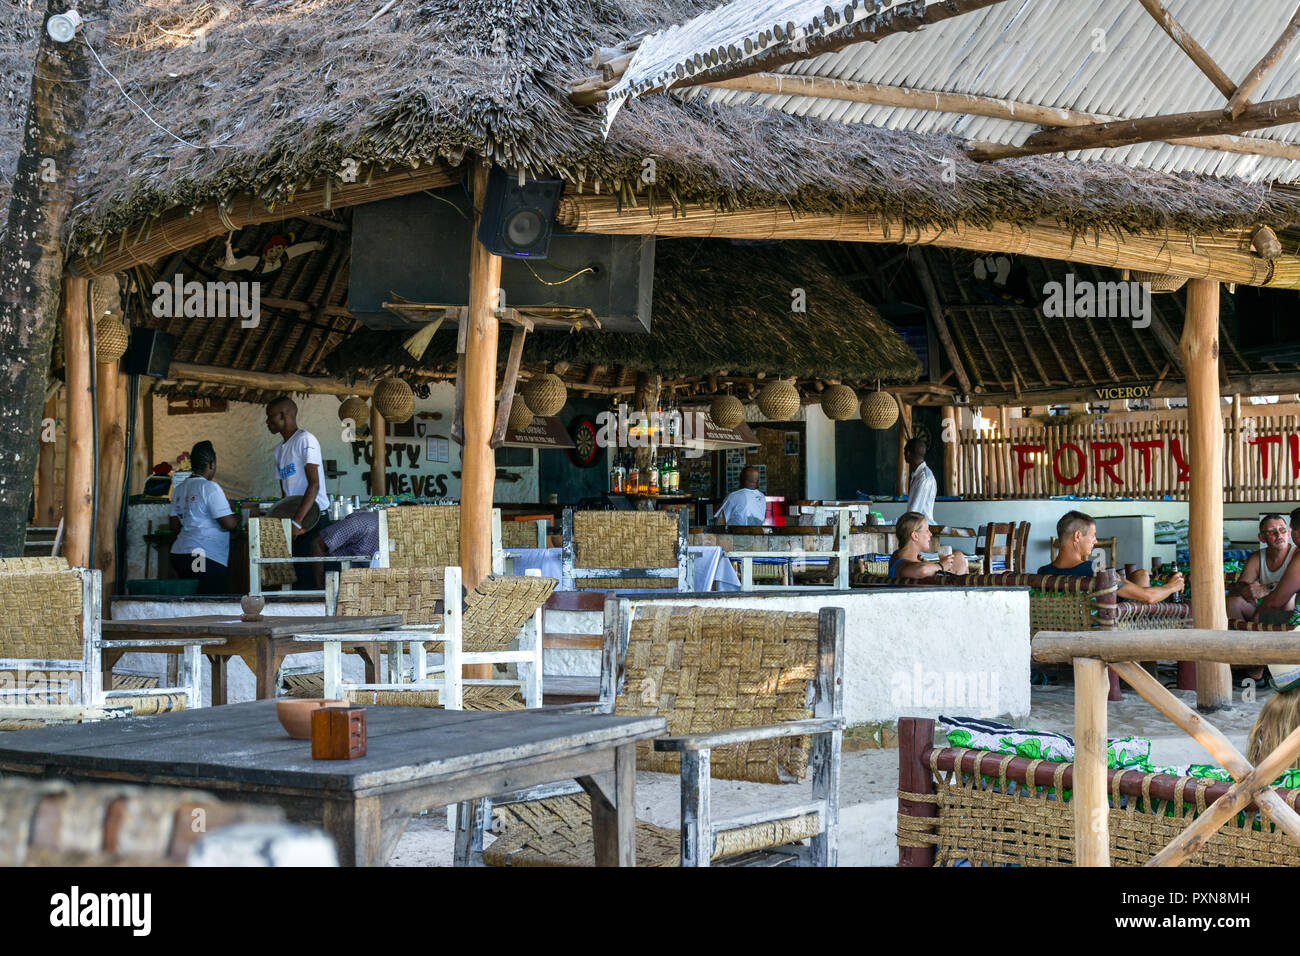 The famous Forty Thieves bar and restaurant with tourists sat by the bar, Diani, Kenya Stock Photo